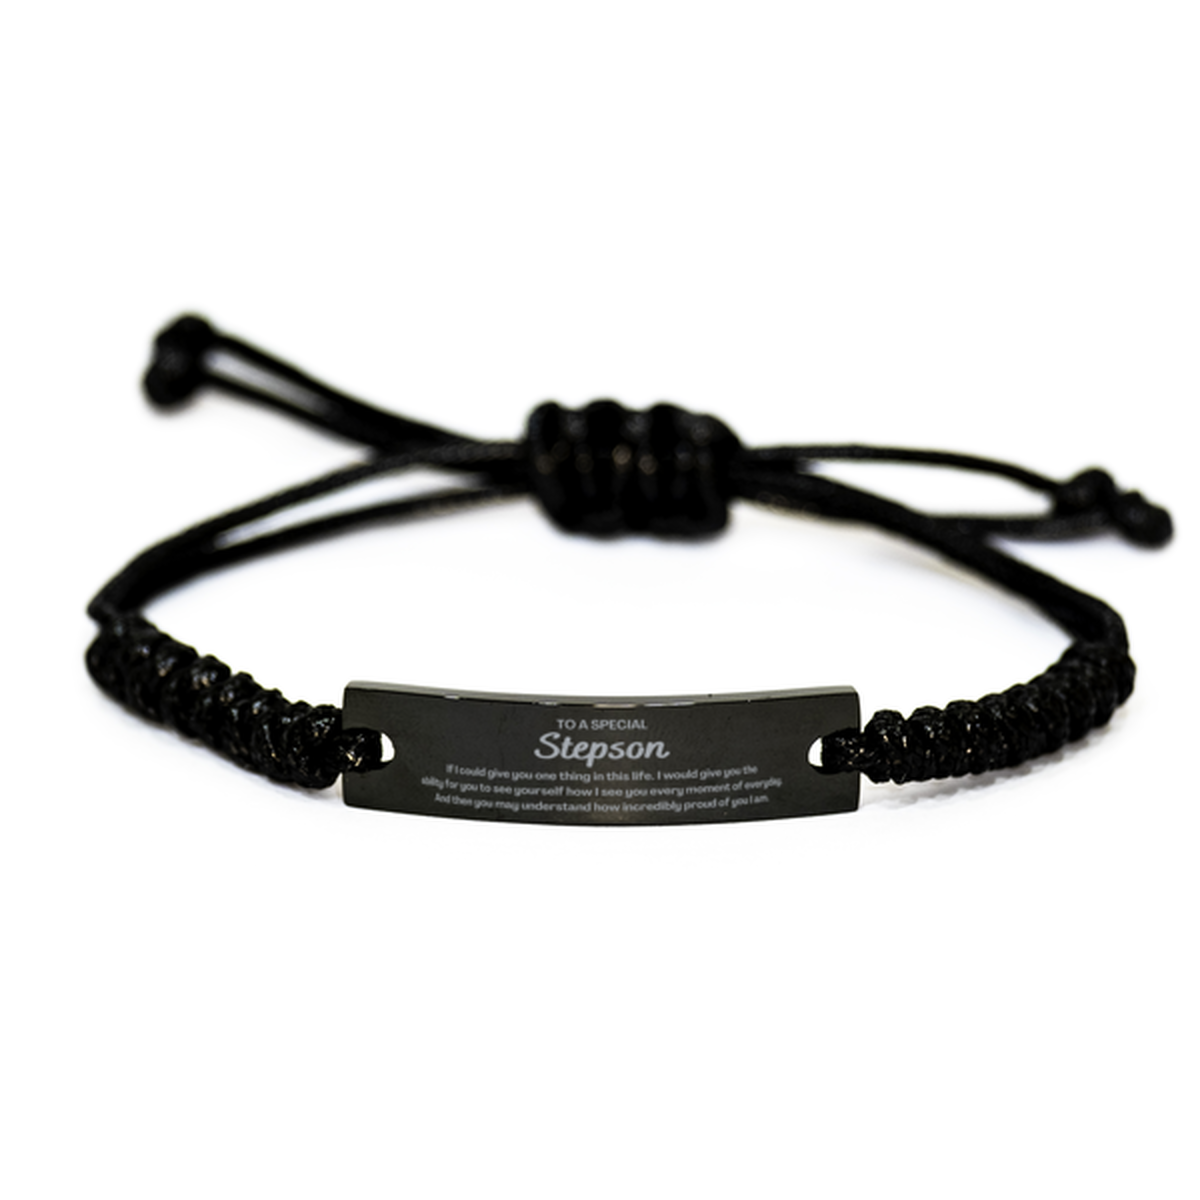 To My Stepson Black Rope Bracelet, Gifts For Stepson Engraved, Inspirational Gifts for Christmas Birthday, Epic Gifts for Stepson To A Special Stepson how incredibly proud of you I am